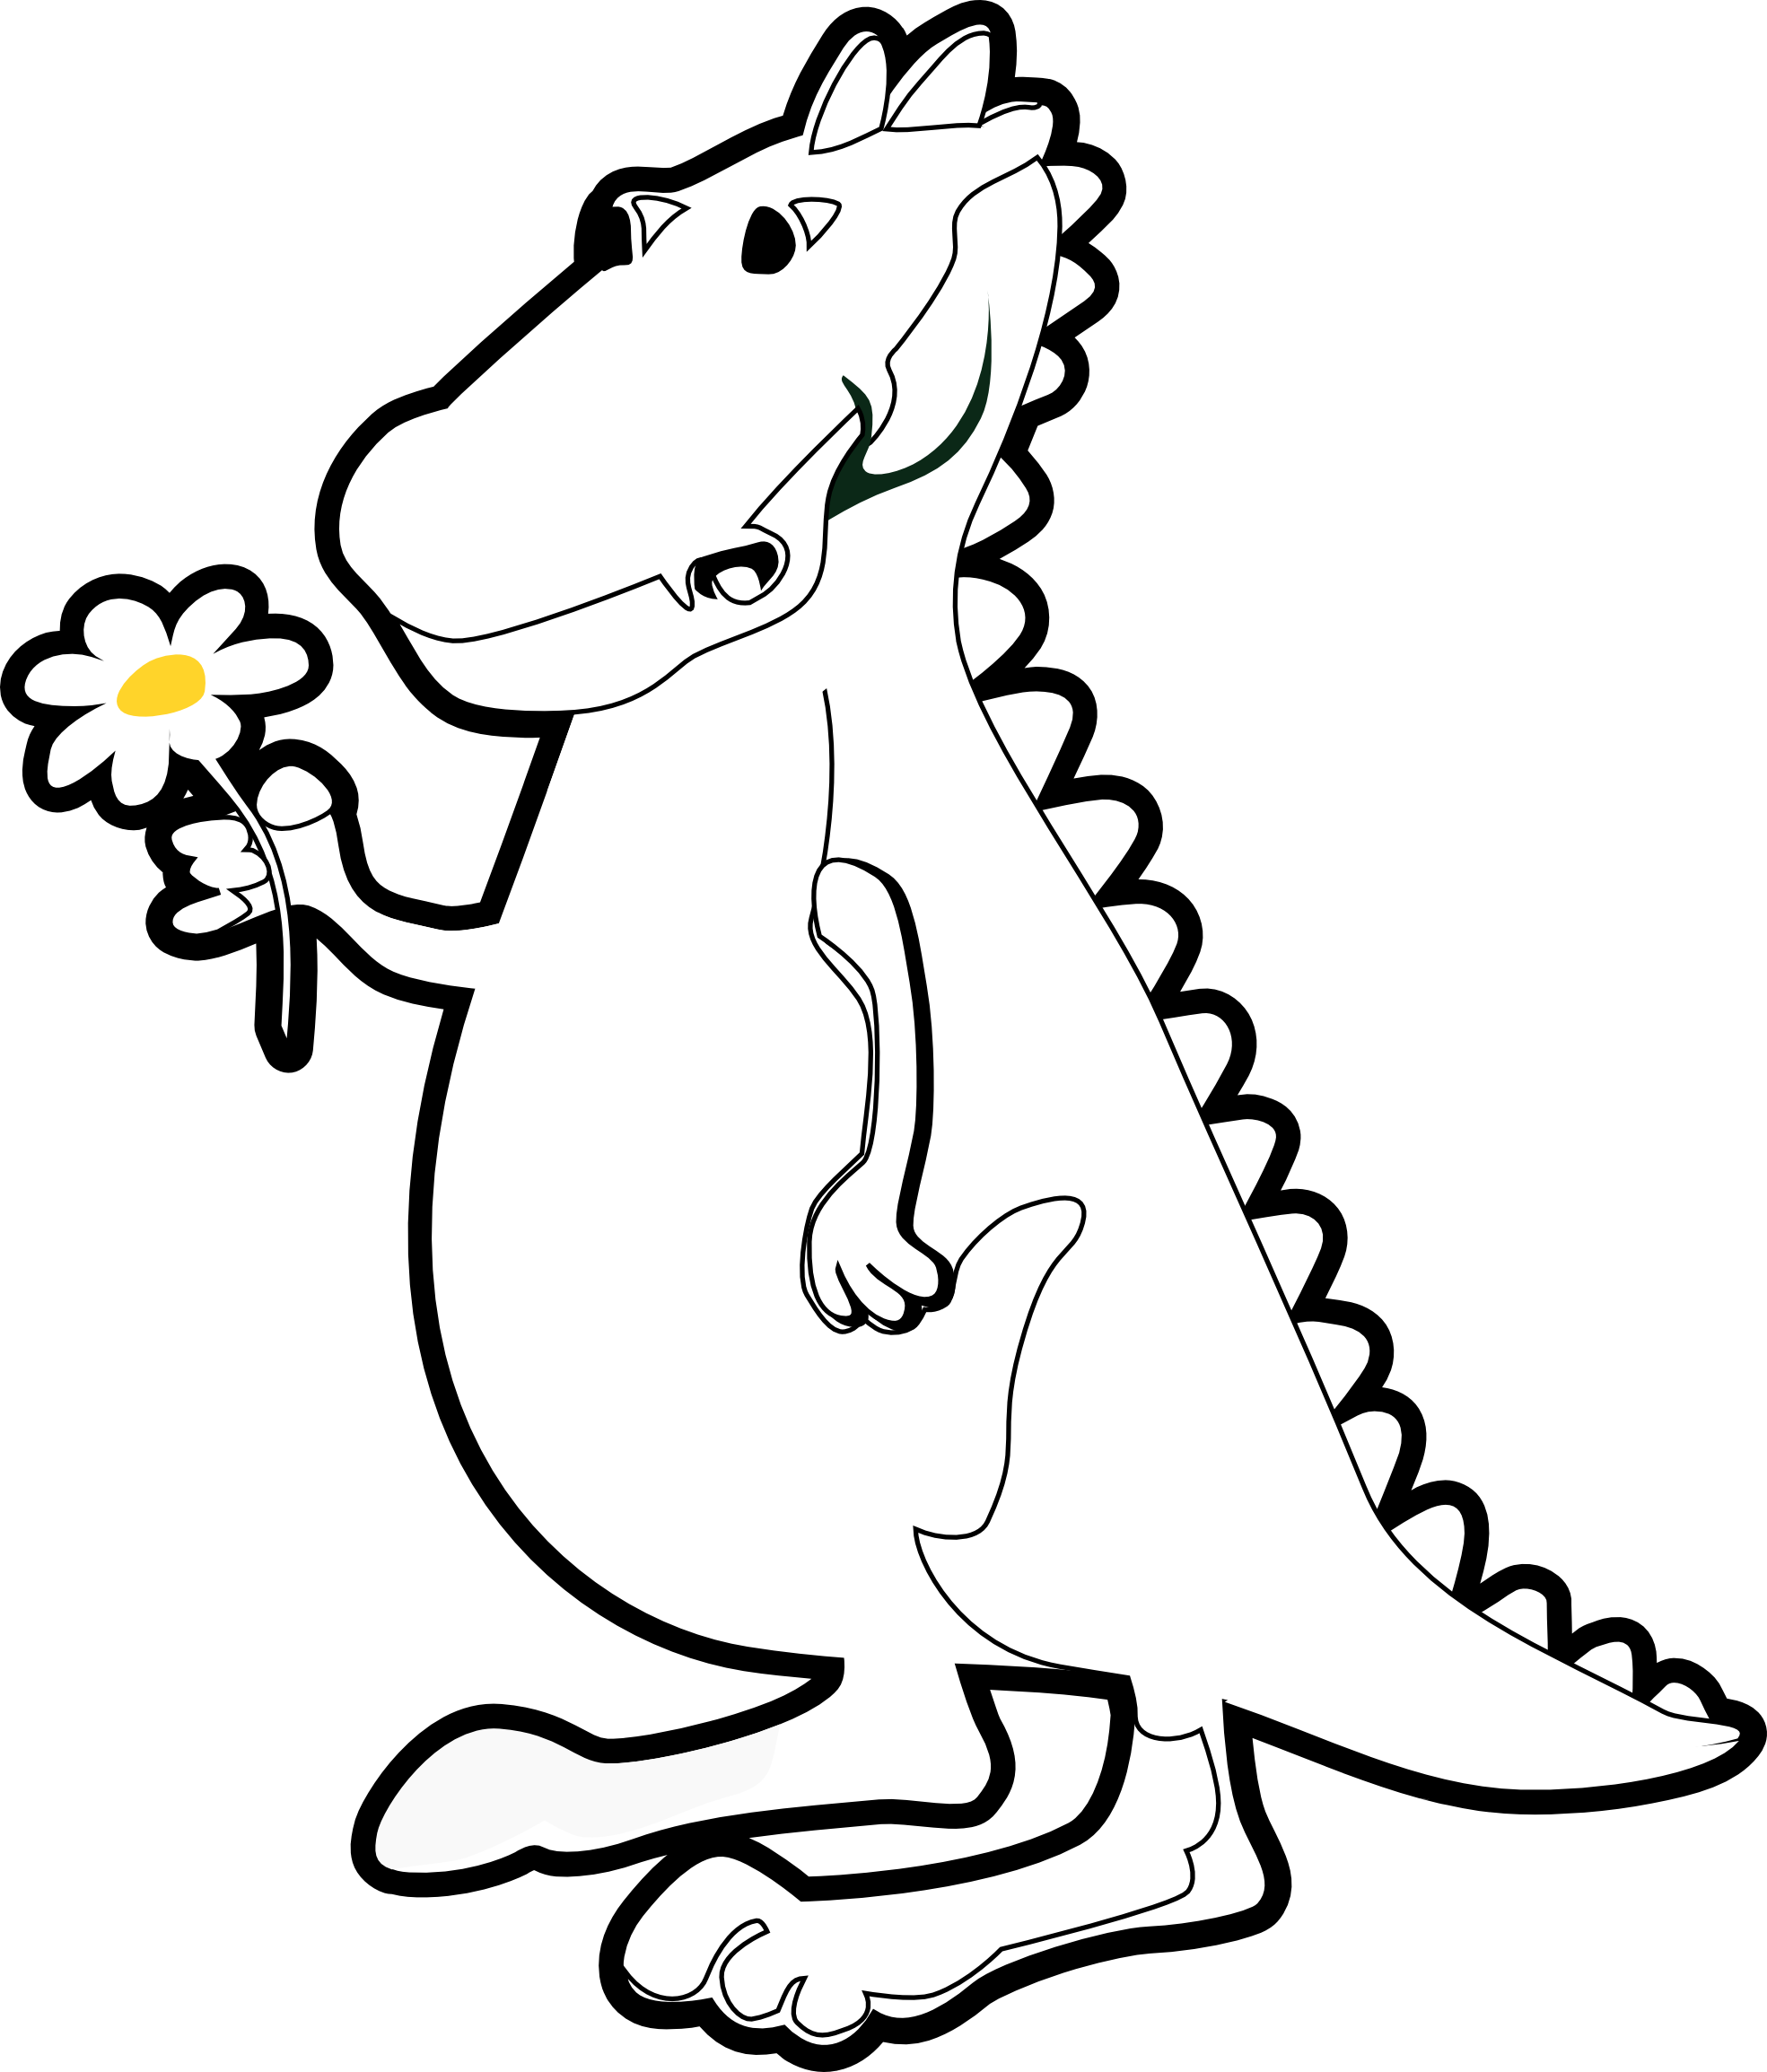 Trex Clipart Black And White - T Rex Black And White, Transparent background PNG HD thumbnail